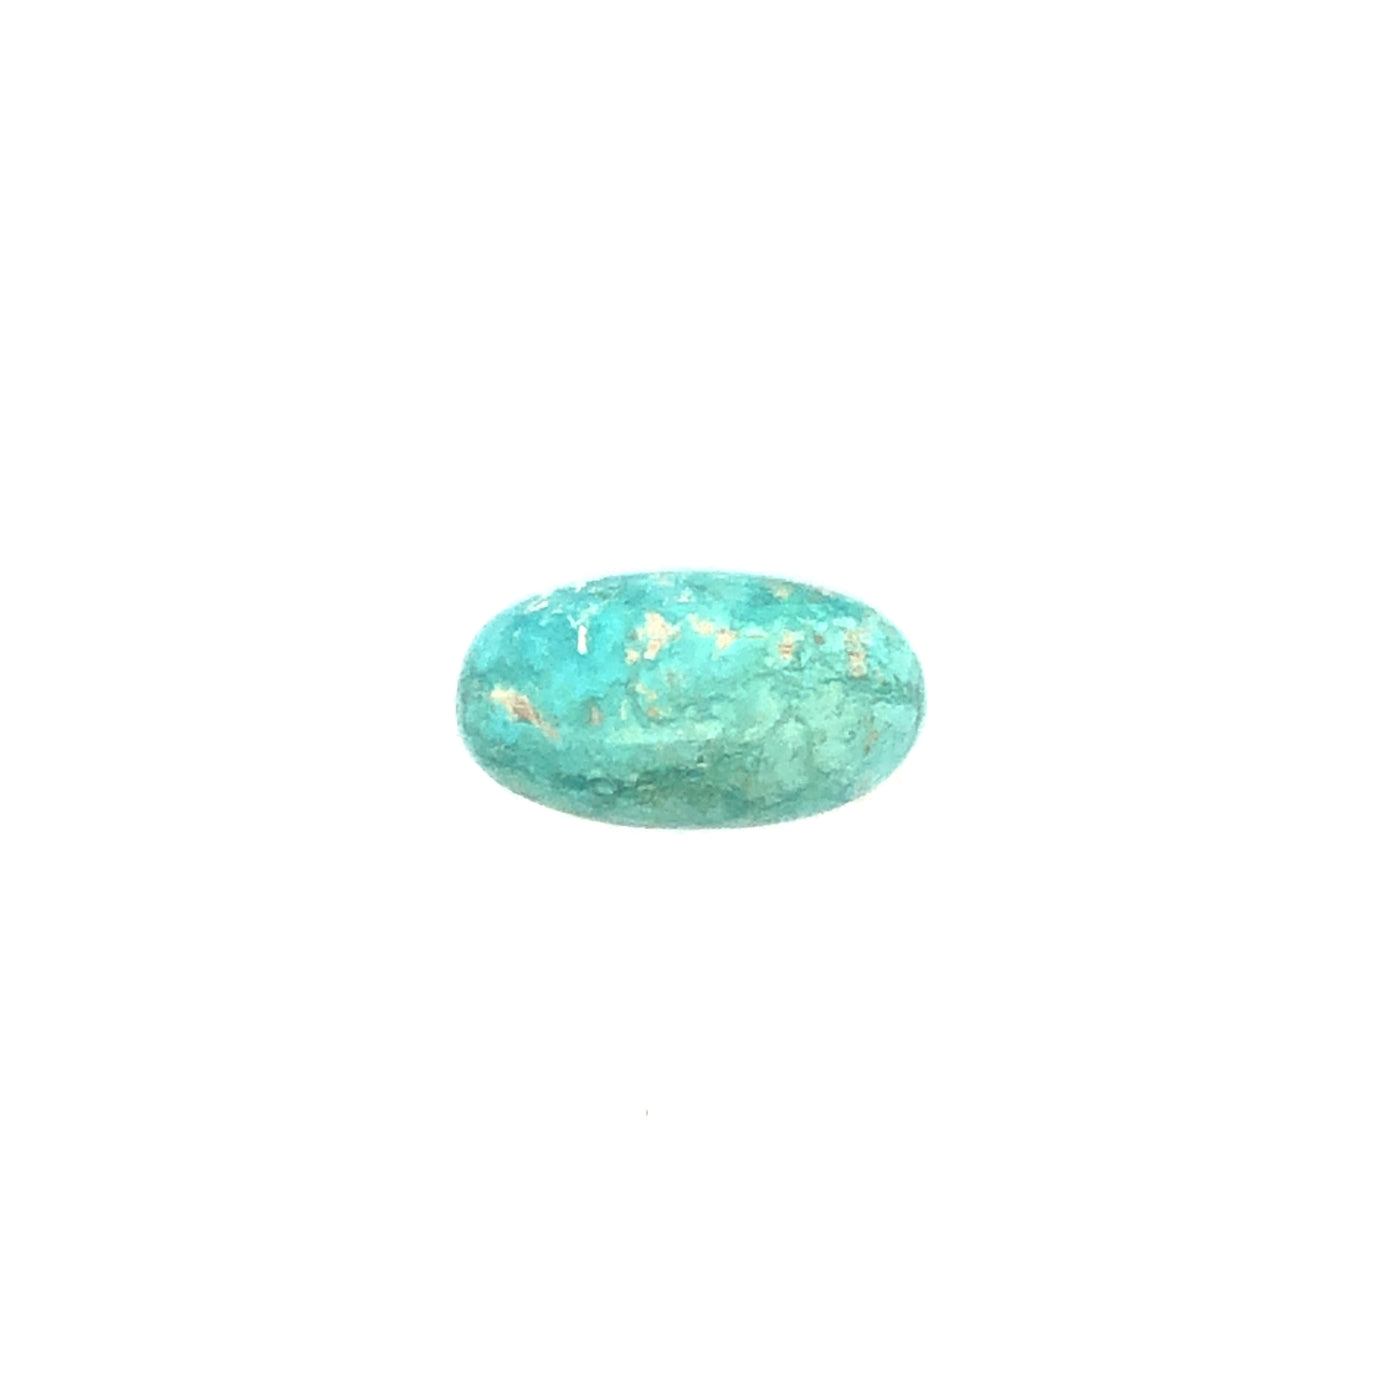 Loose Narooma Turquoise Oval Shaped 13.18Ct Blue